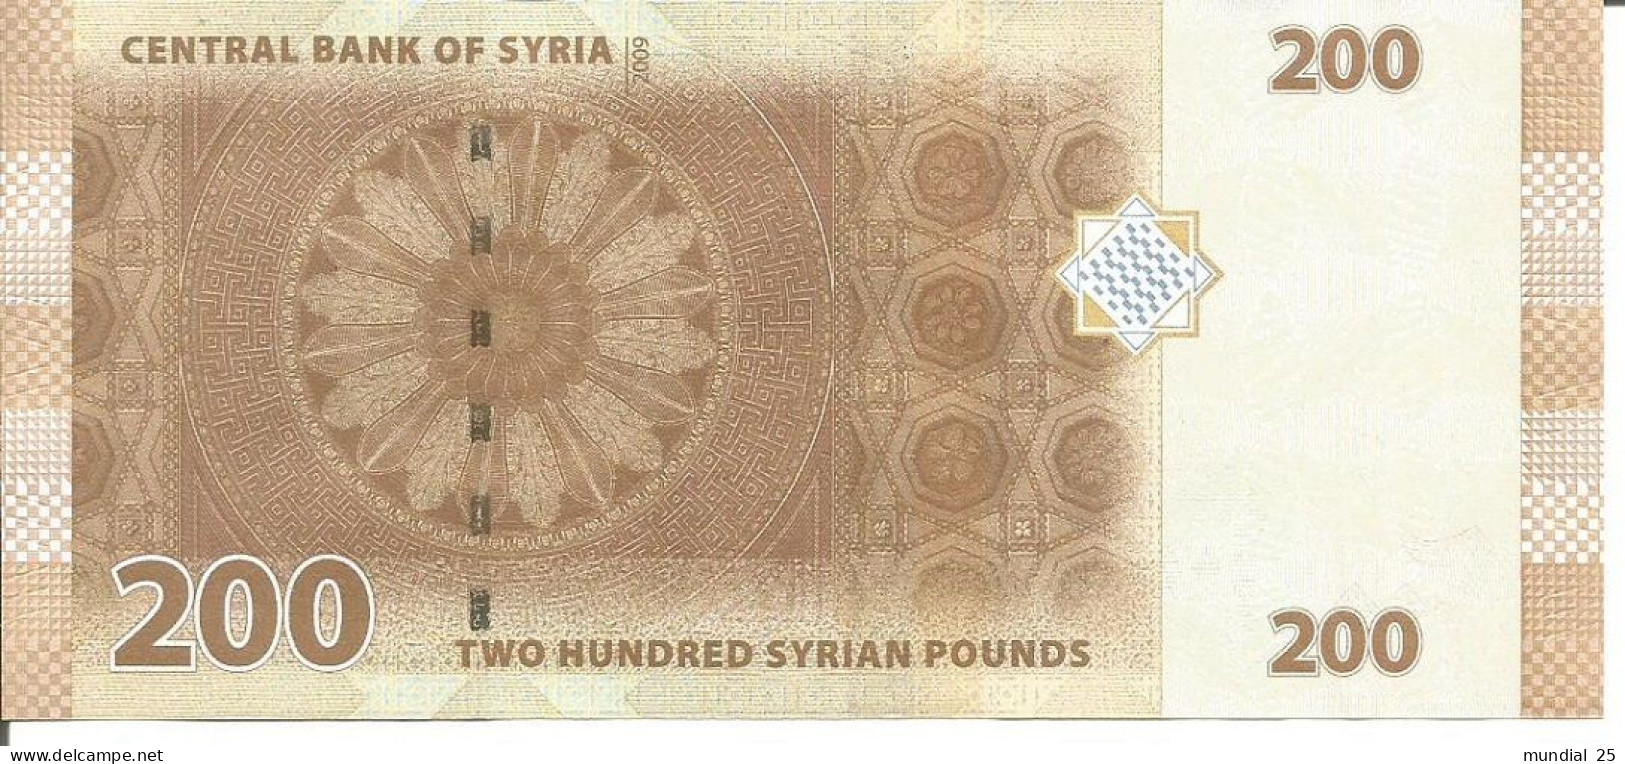 2 SYRIA NOTES 200 POUNDS 2009 - Syrie